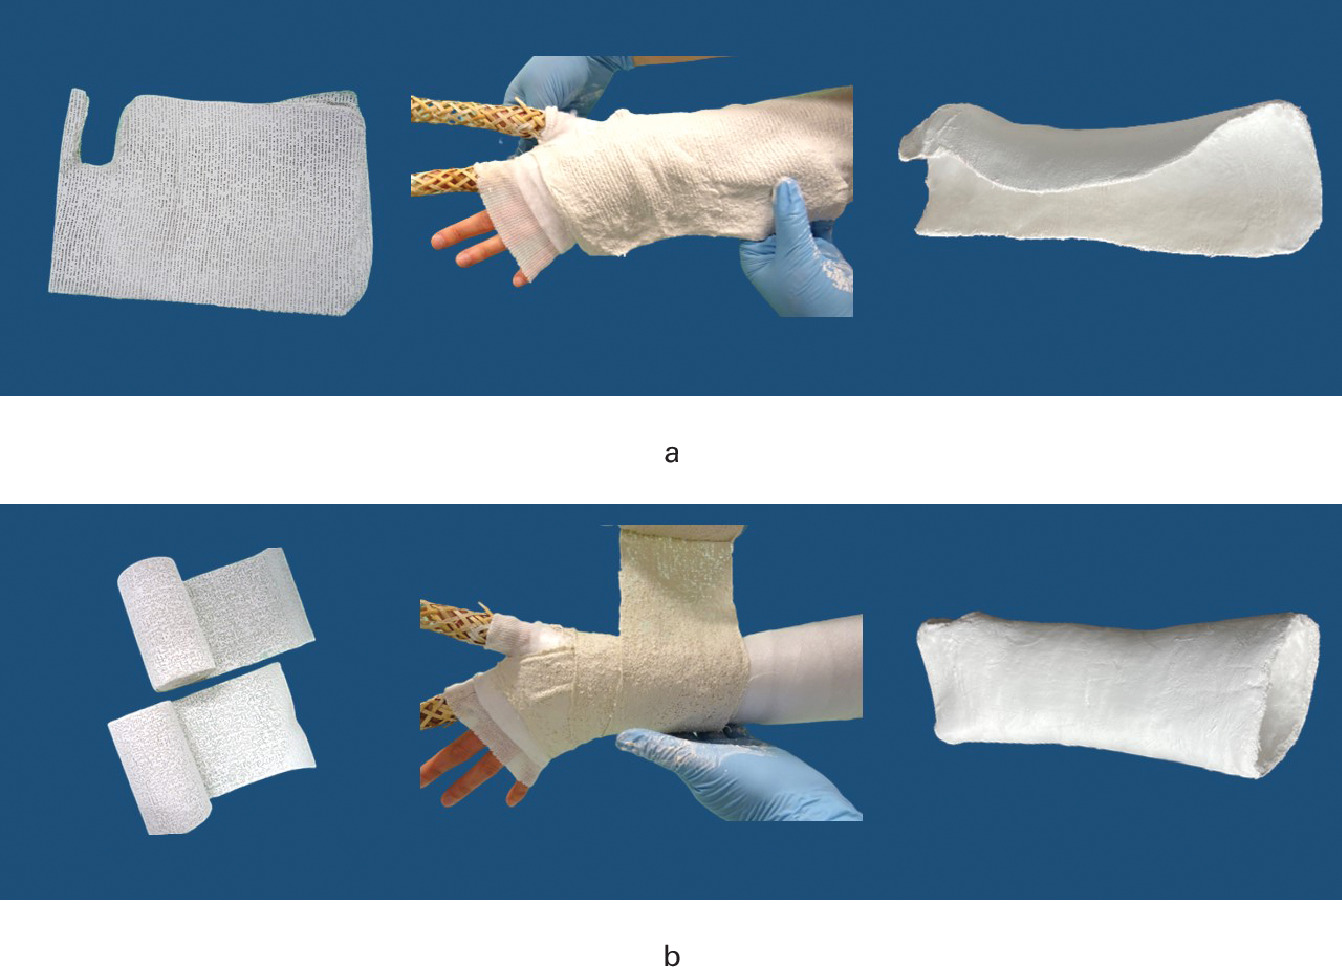 Fig. 1 
          a) Plaster splint. b) Circumferential cast. Synthetic casting, instead of plaster of Paris, was also accepted.
        